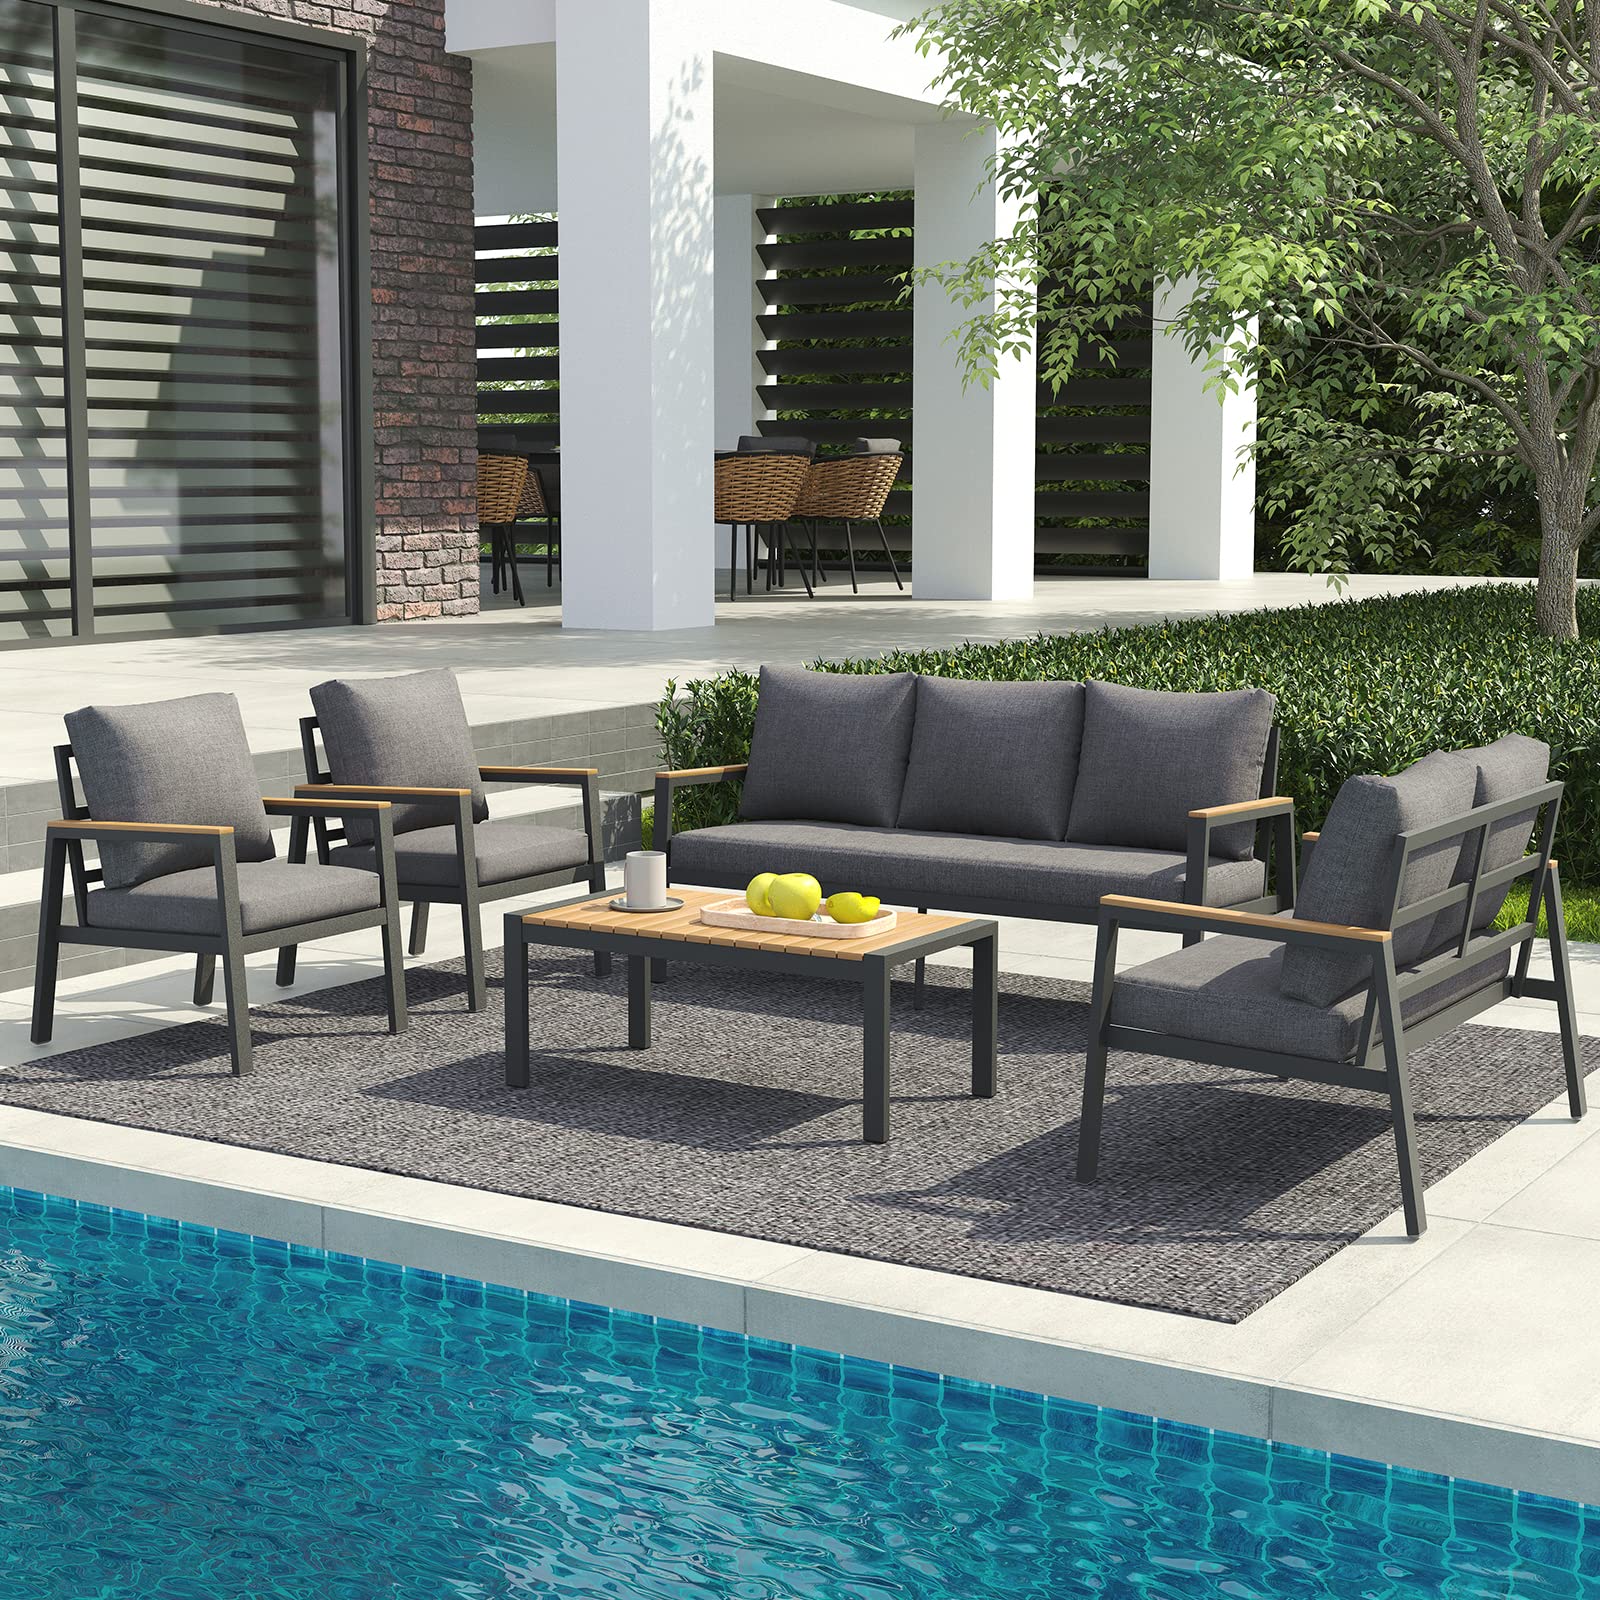 7 Seating Aluminum Patio Furniture Set with Teak Top Coffee Table